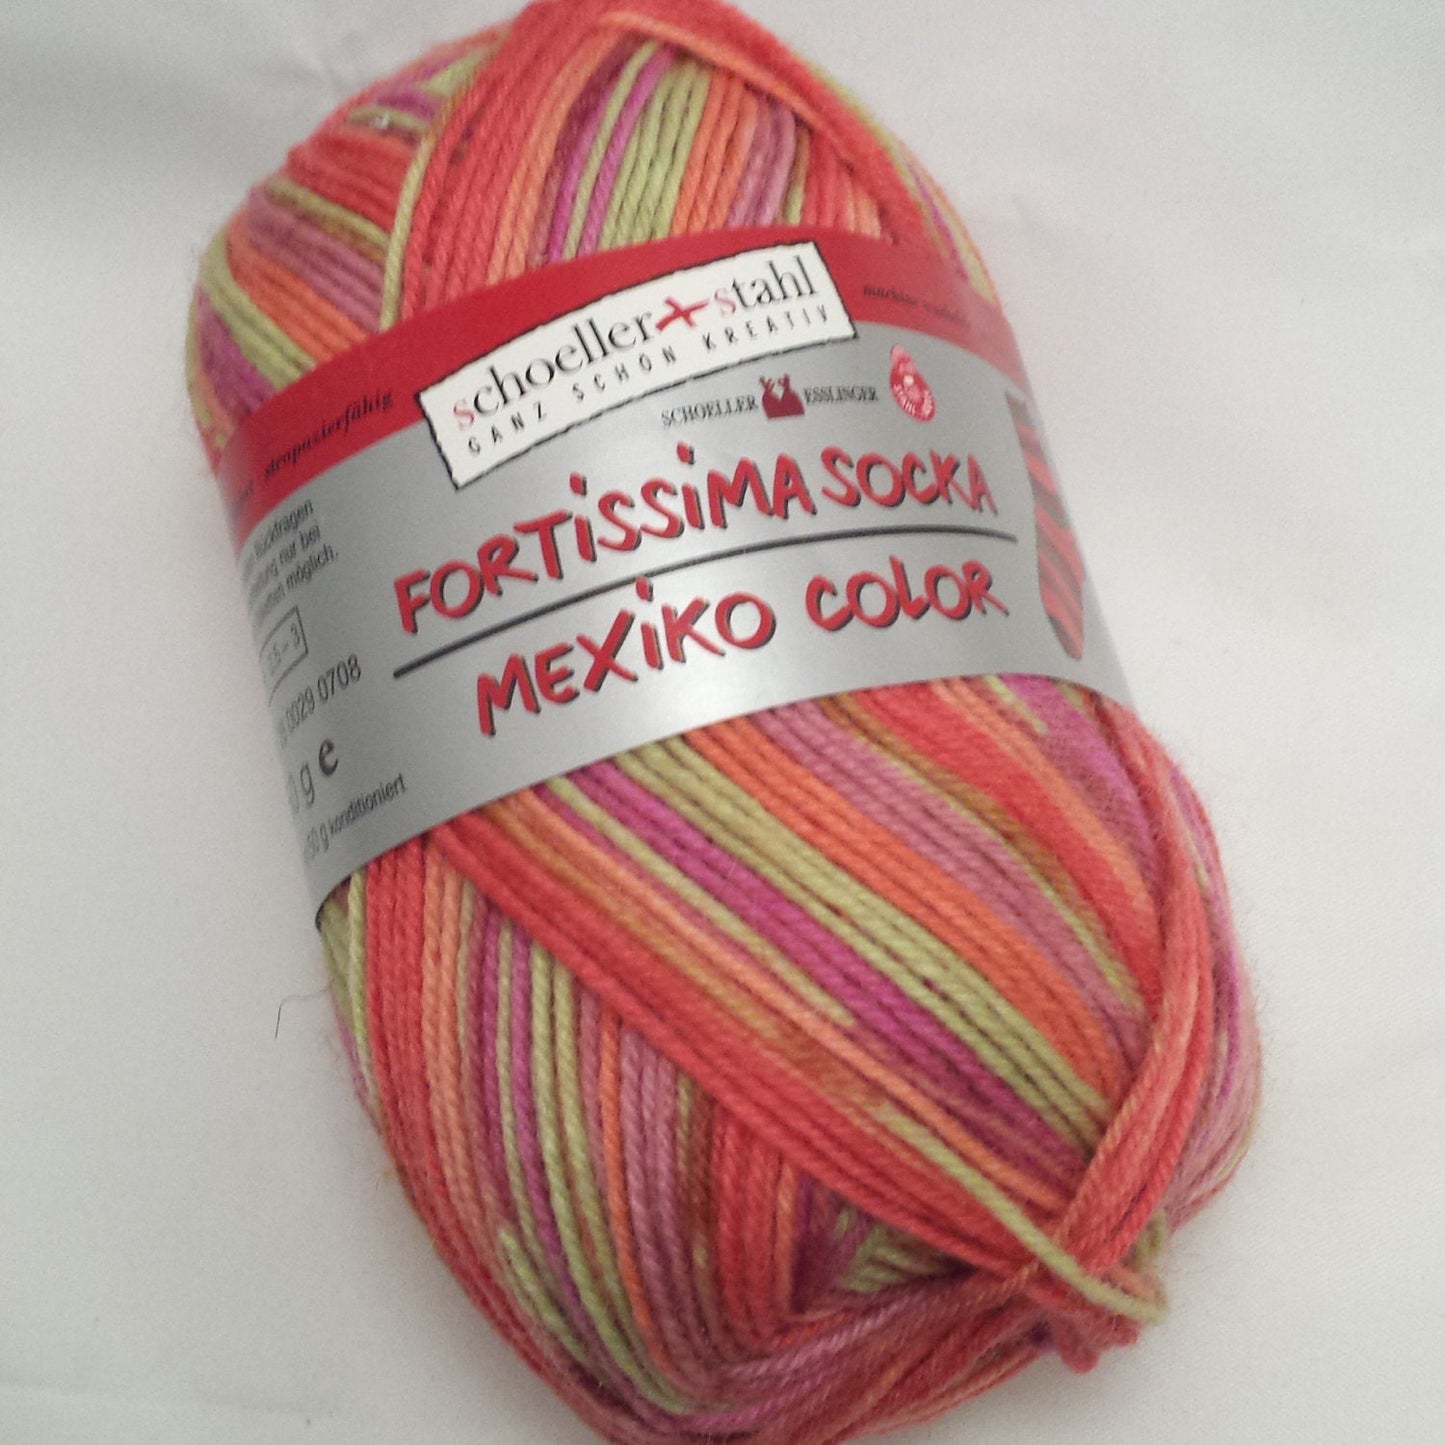 Sock Yarn - Self Patterning. 50g ball of Schoeller and Stahl Fortissima Socka Mexiko Kids Color 036. FREE sock pattern. Wool Polyamide mix